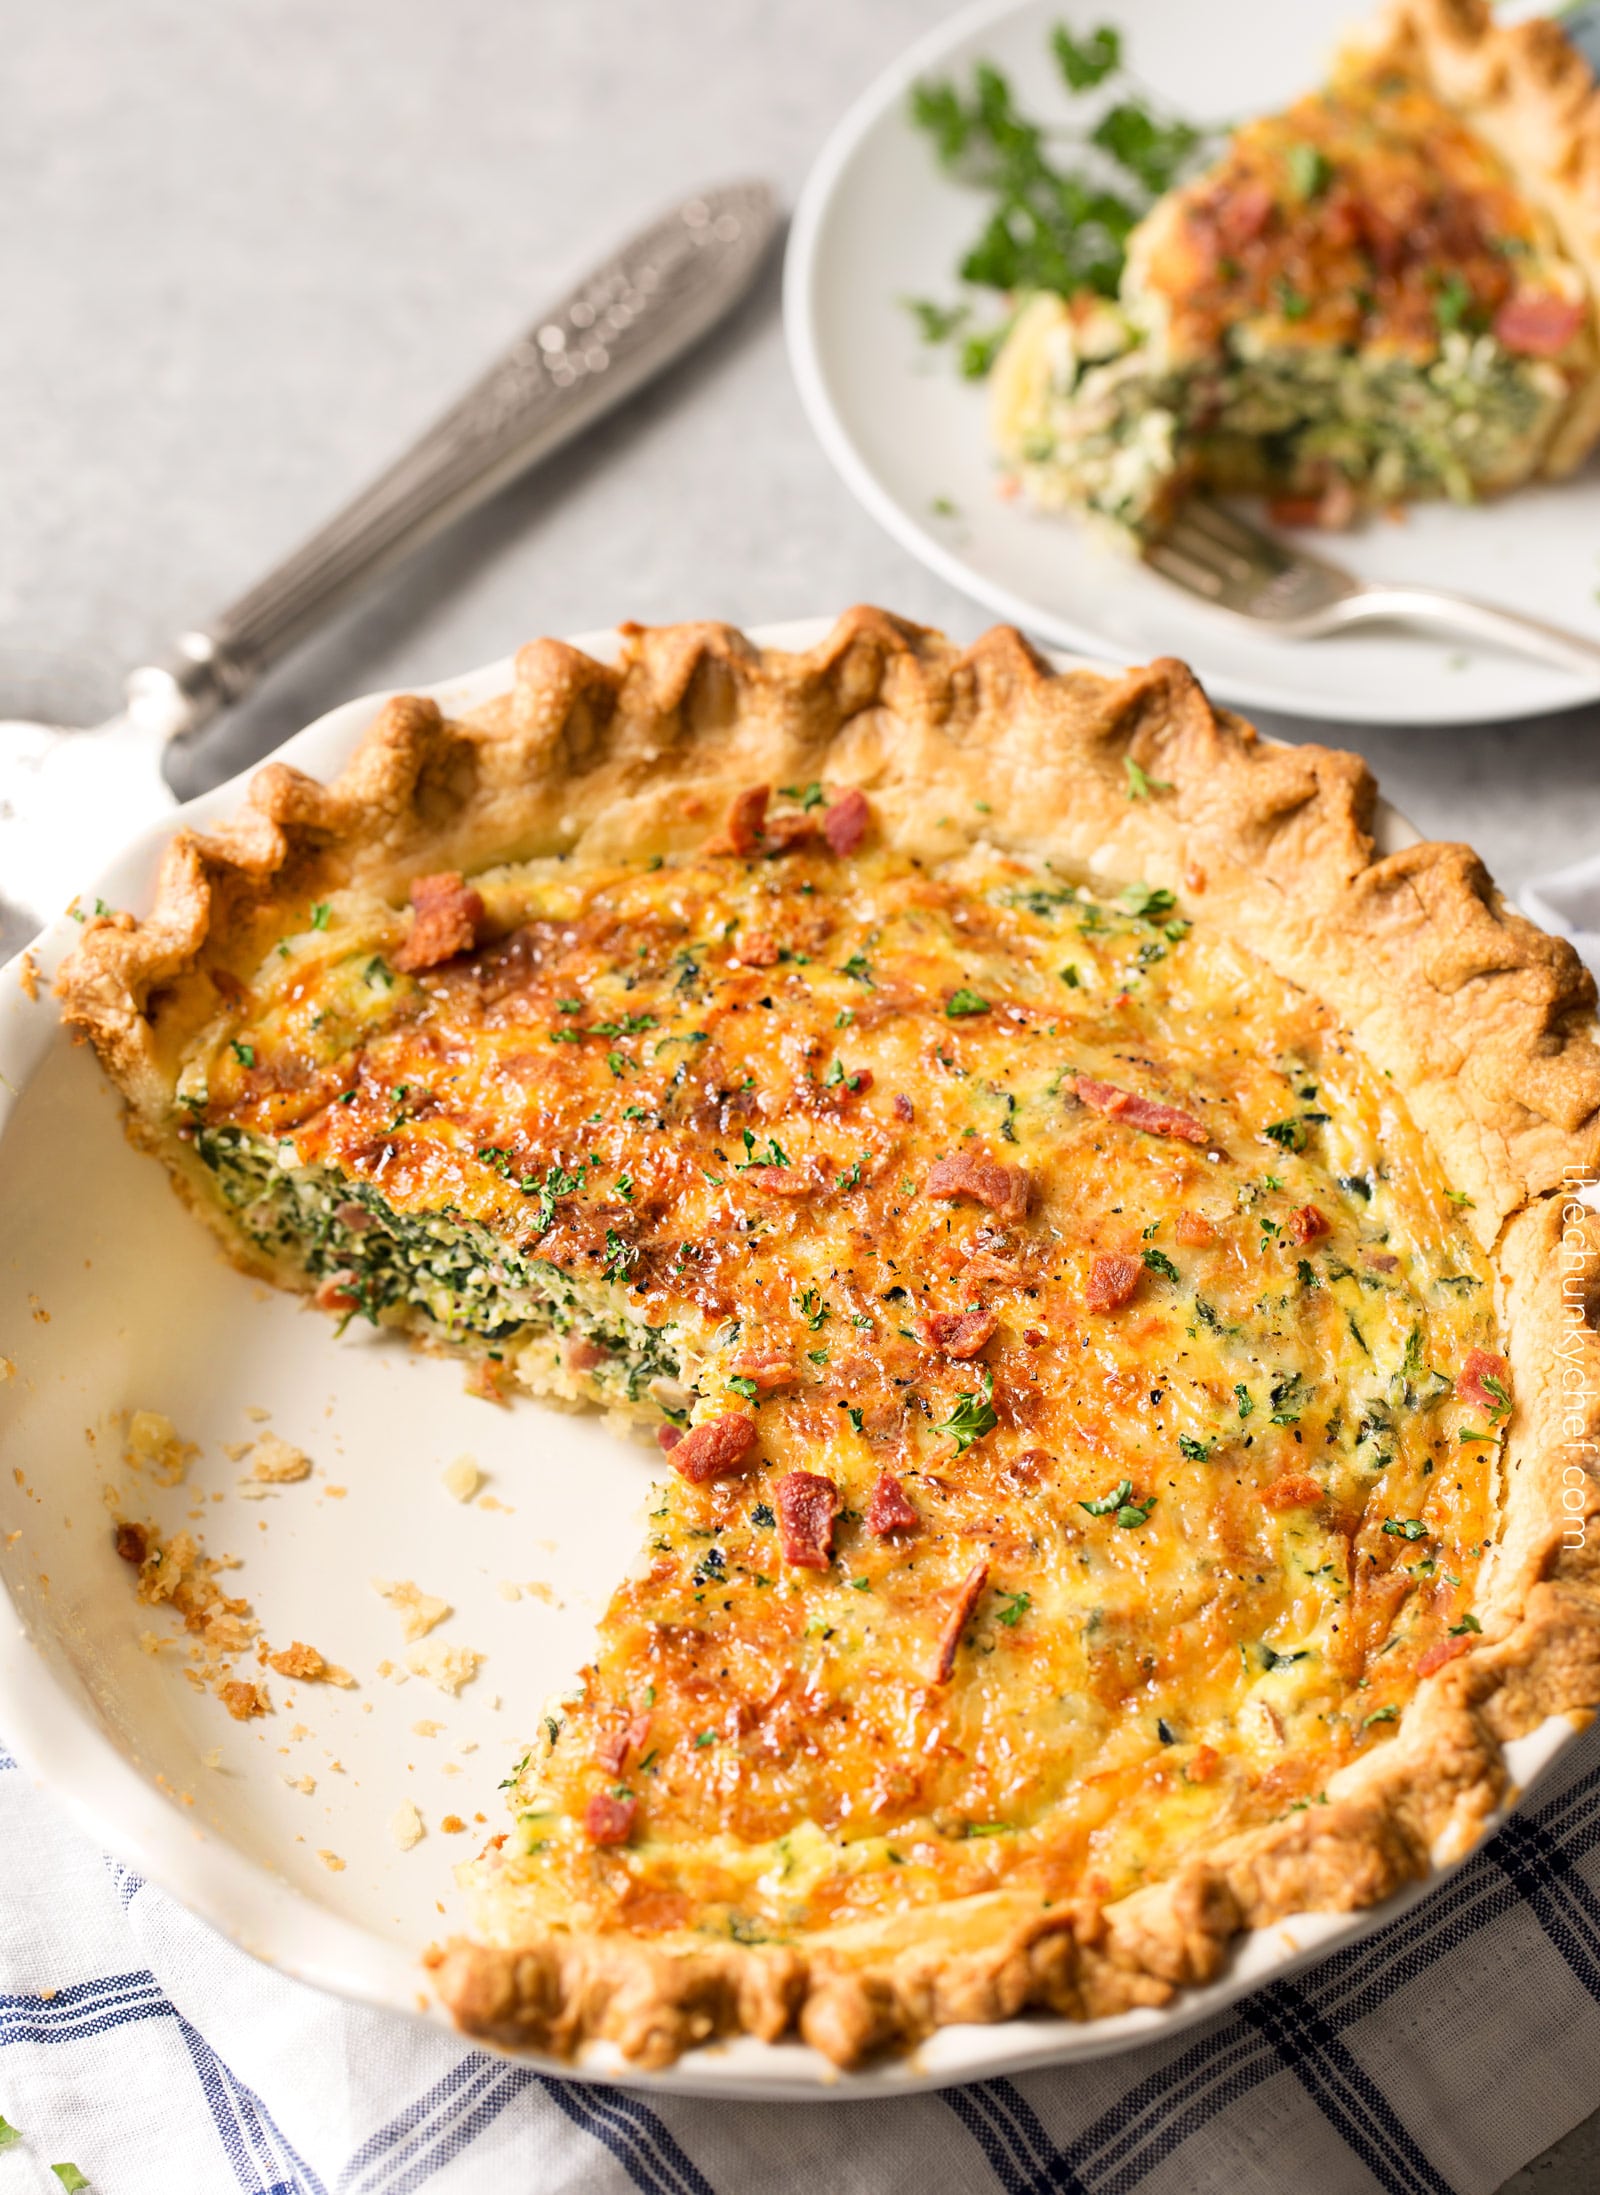 Basic Cheesy Spinach Quiche with Bacon - The Chunky Chef